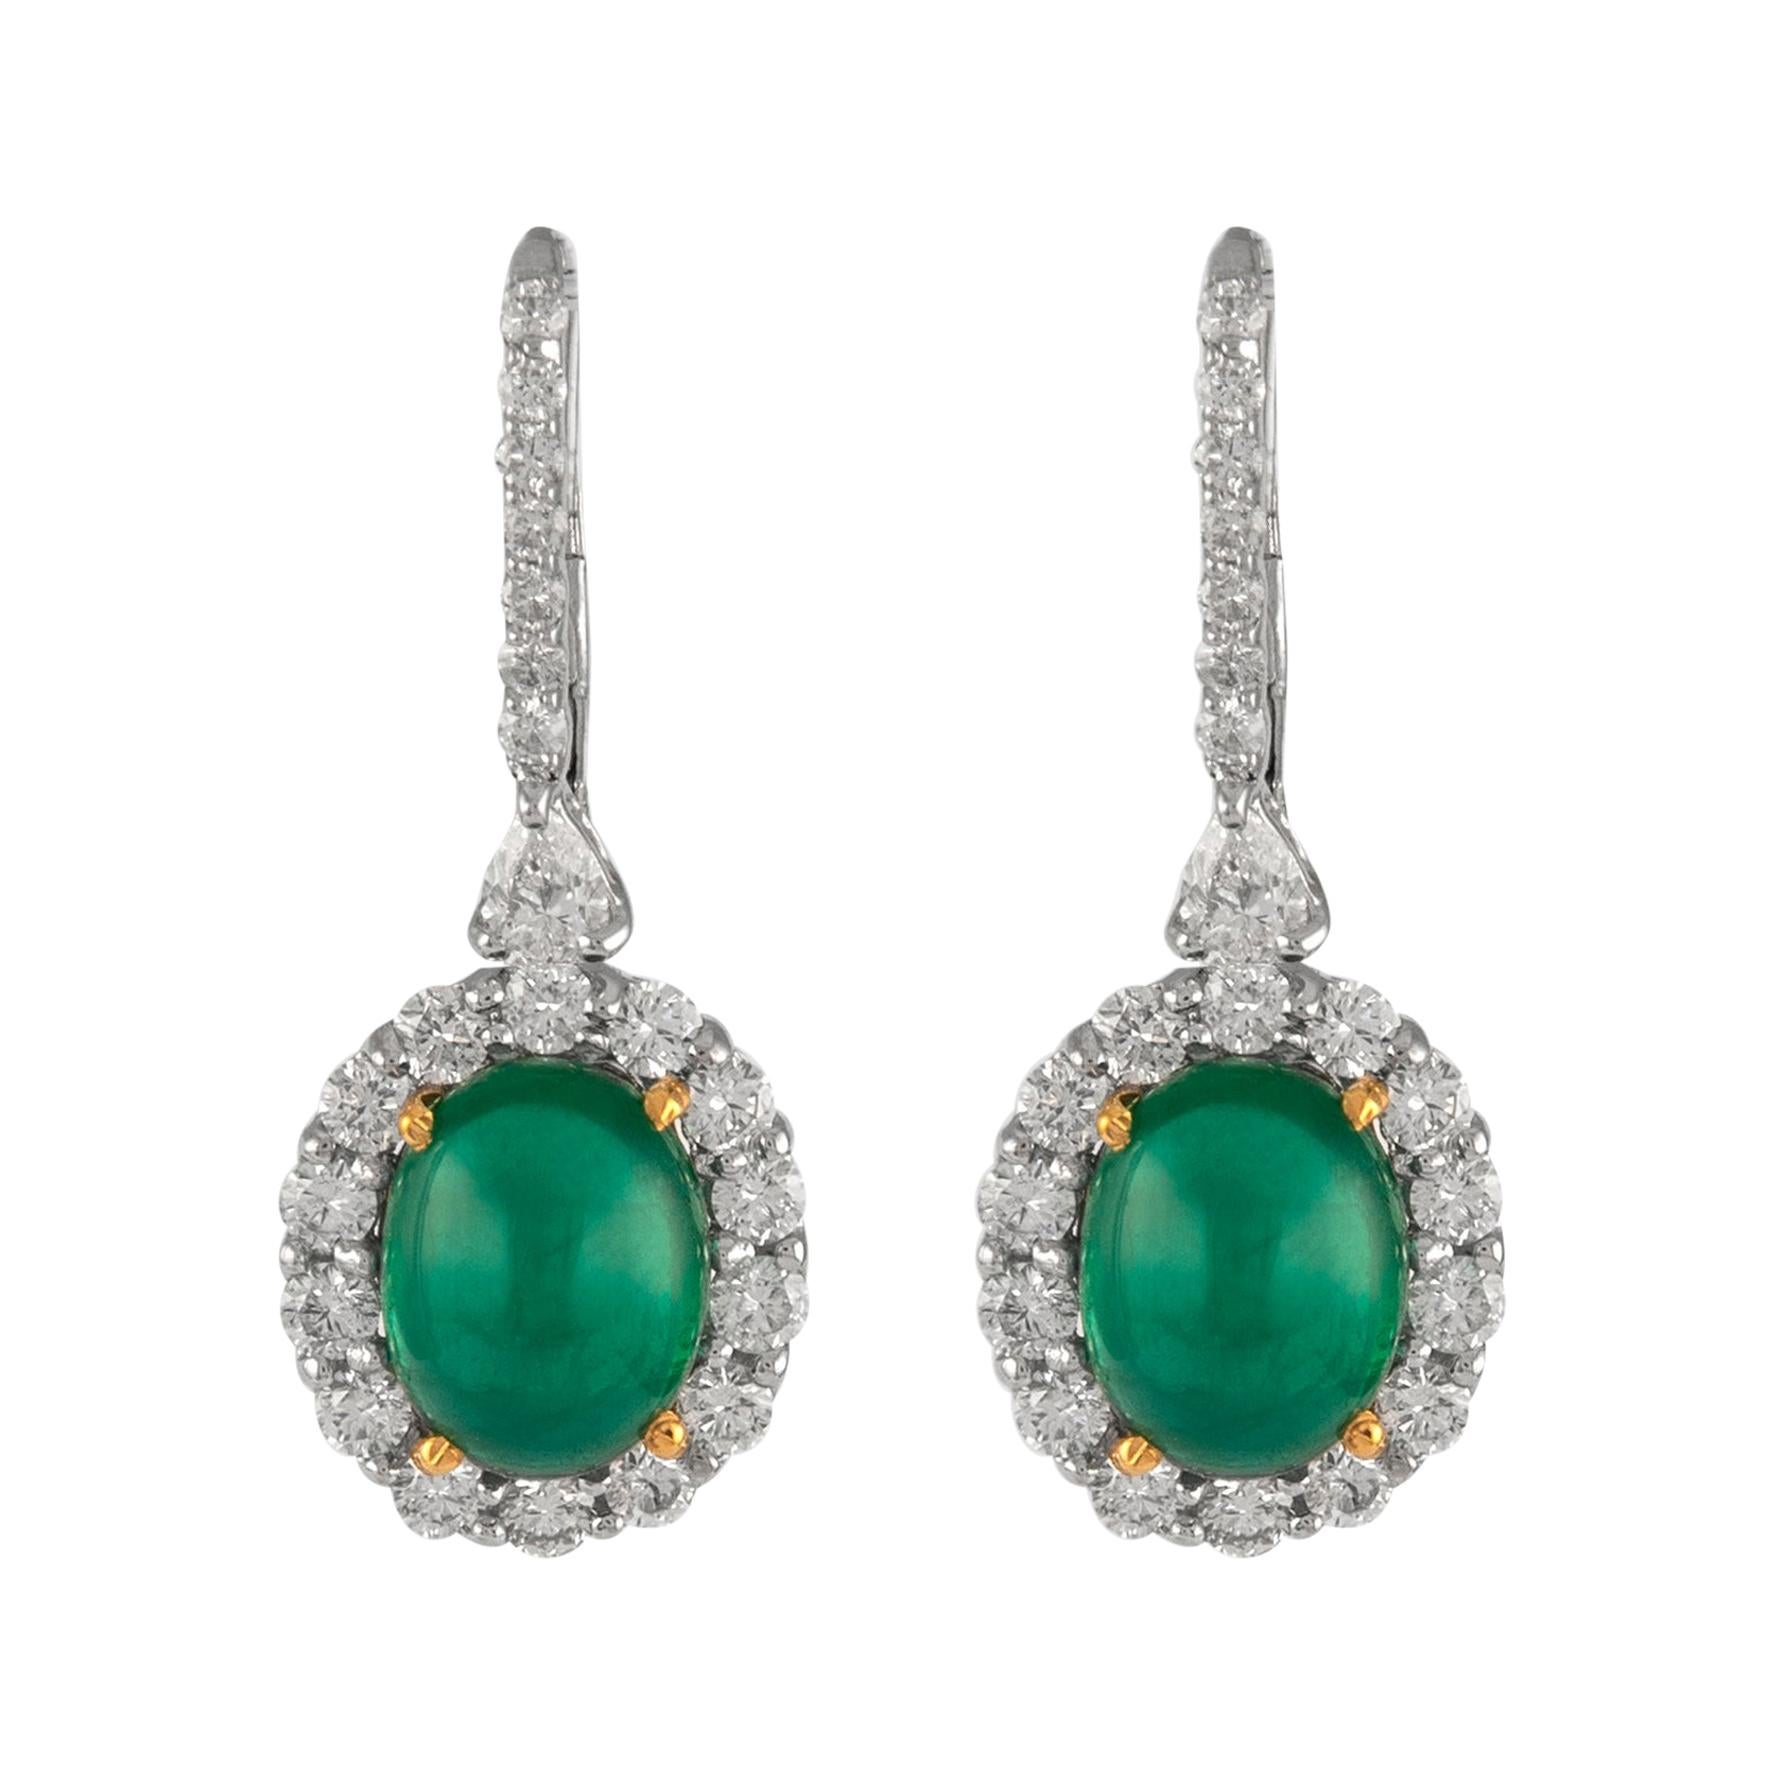 8.45ct Cabochon Emeralds with Diamonds Drop Earrings 18k White Gold